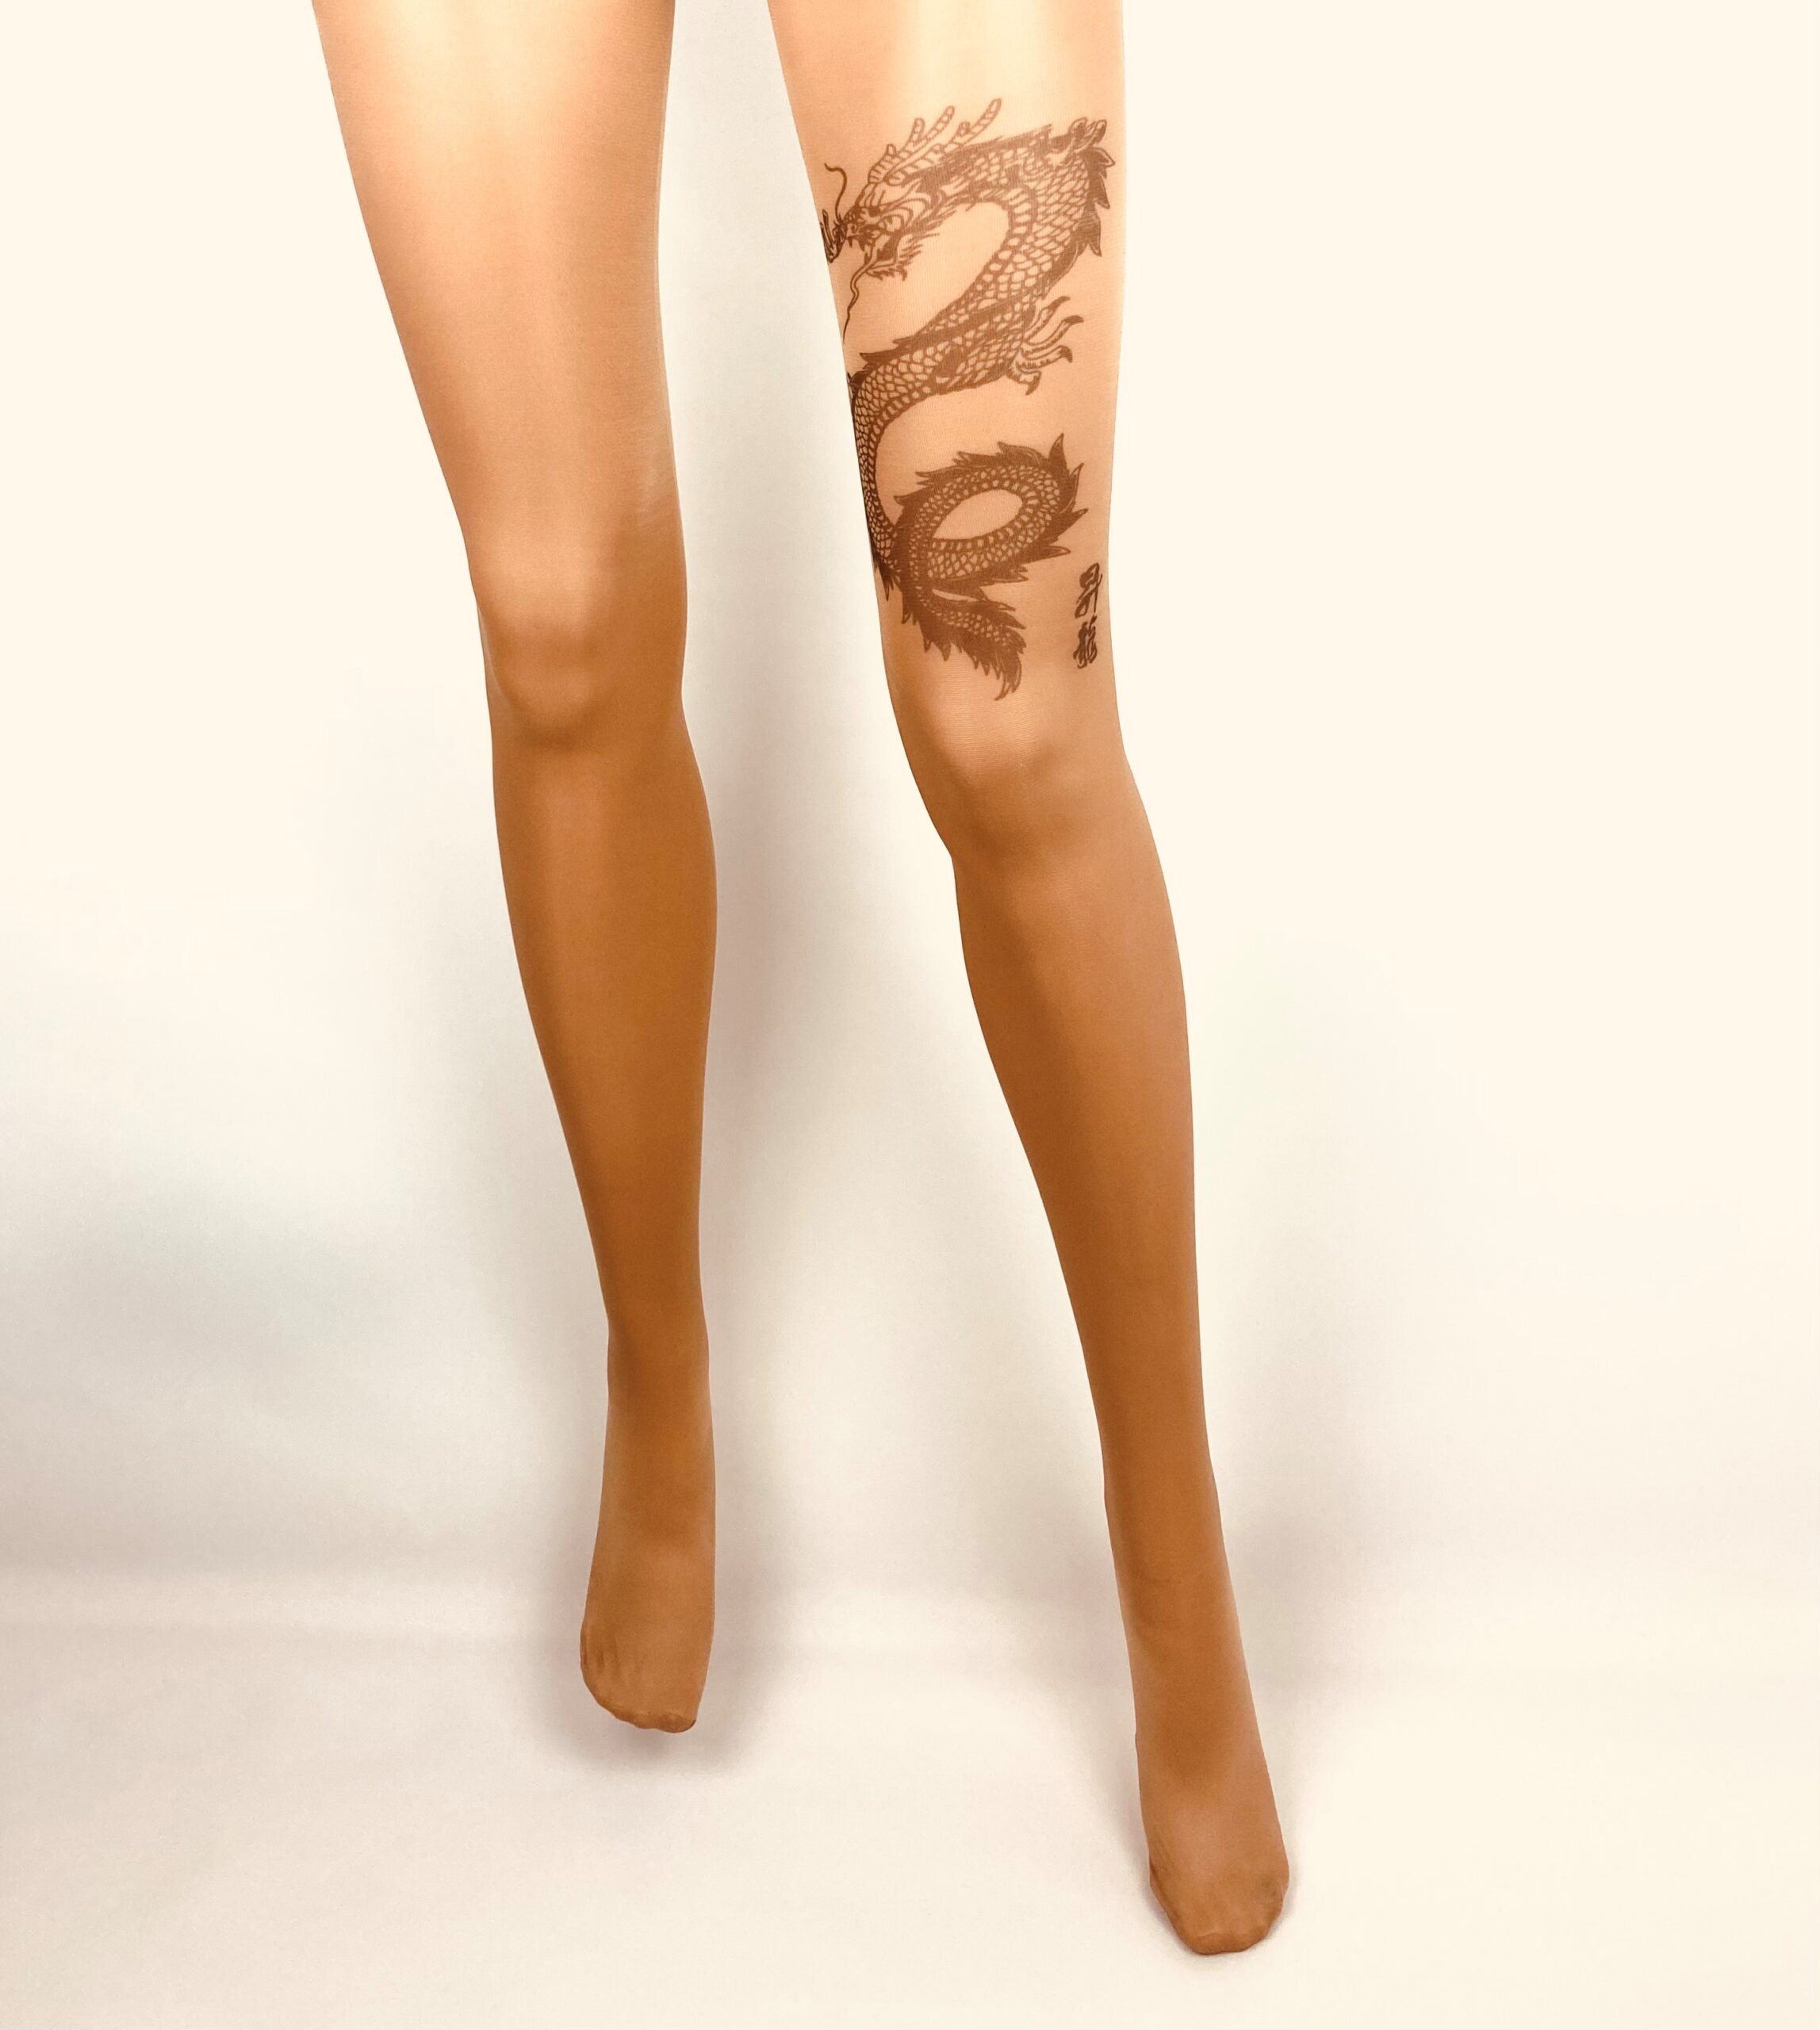 Vivienne Westwood brings Colourful Tattoo Tights to the Catwalk | The Tight  Spot Blog